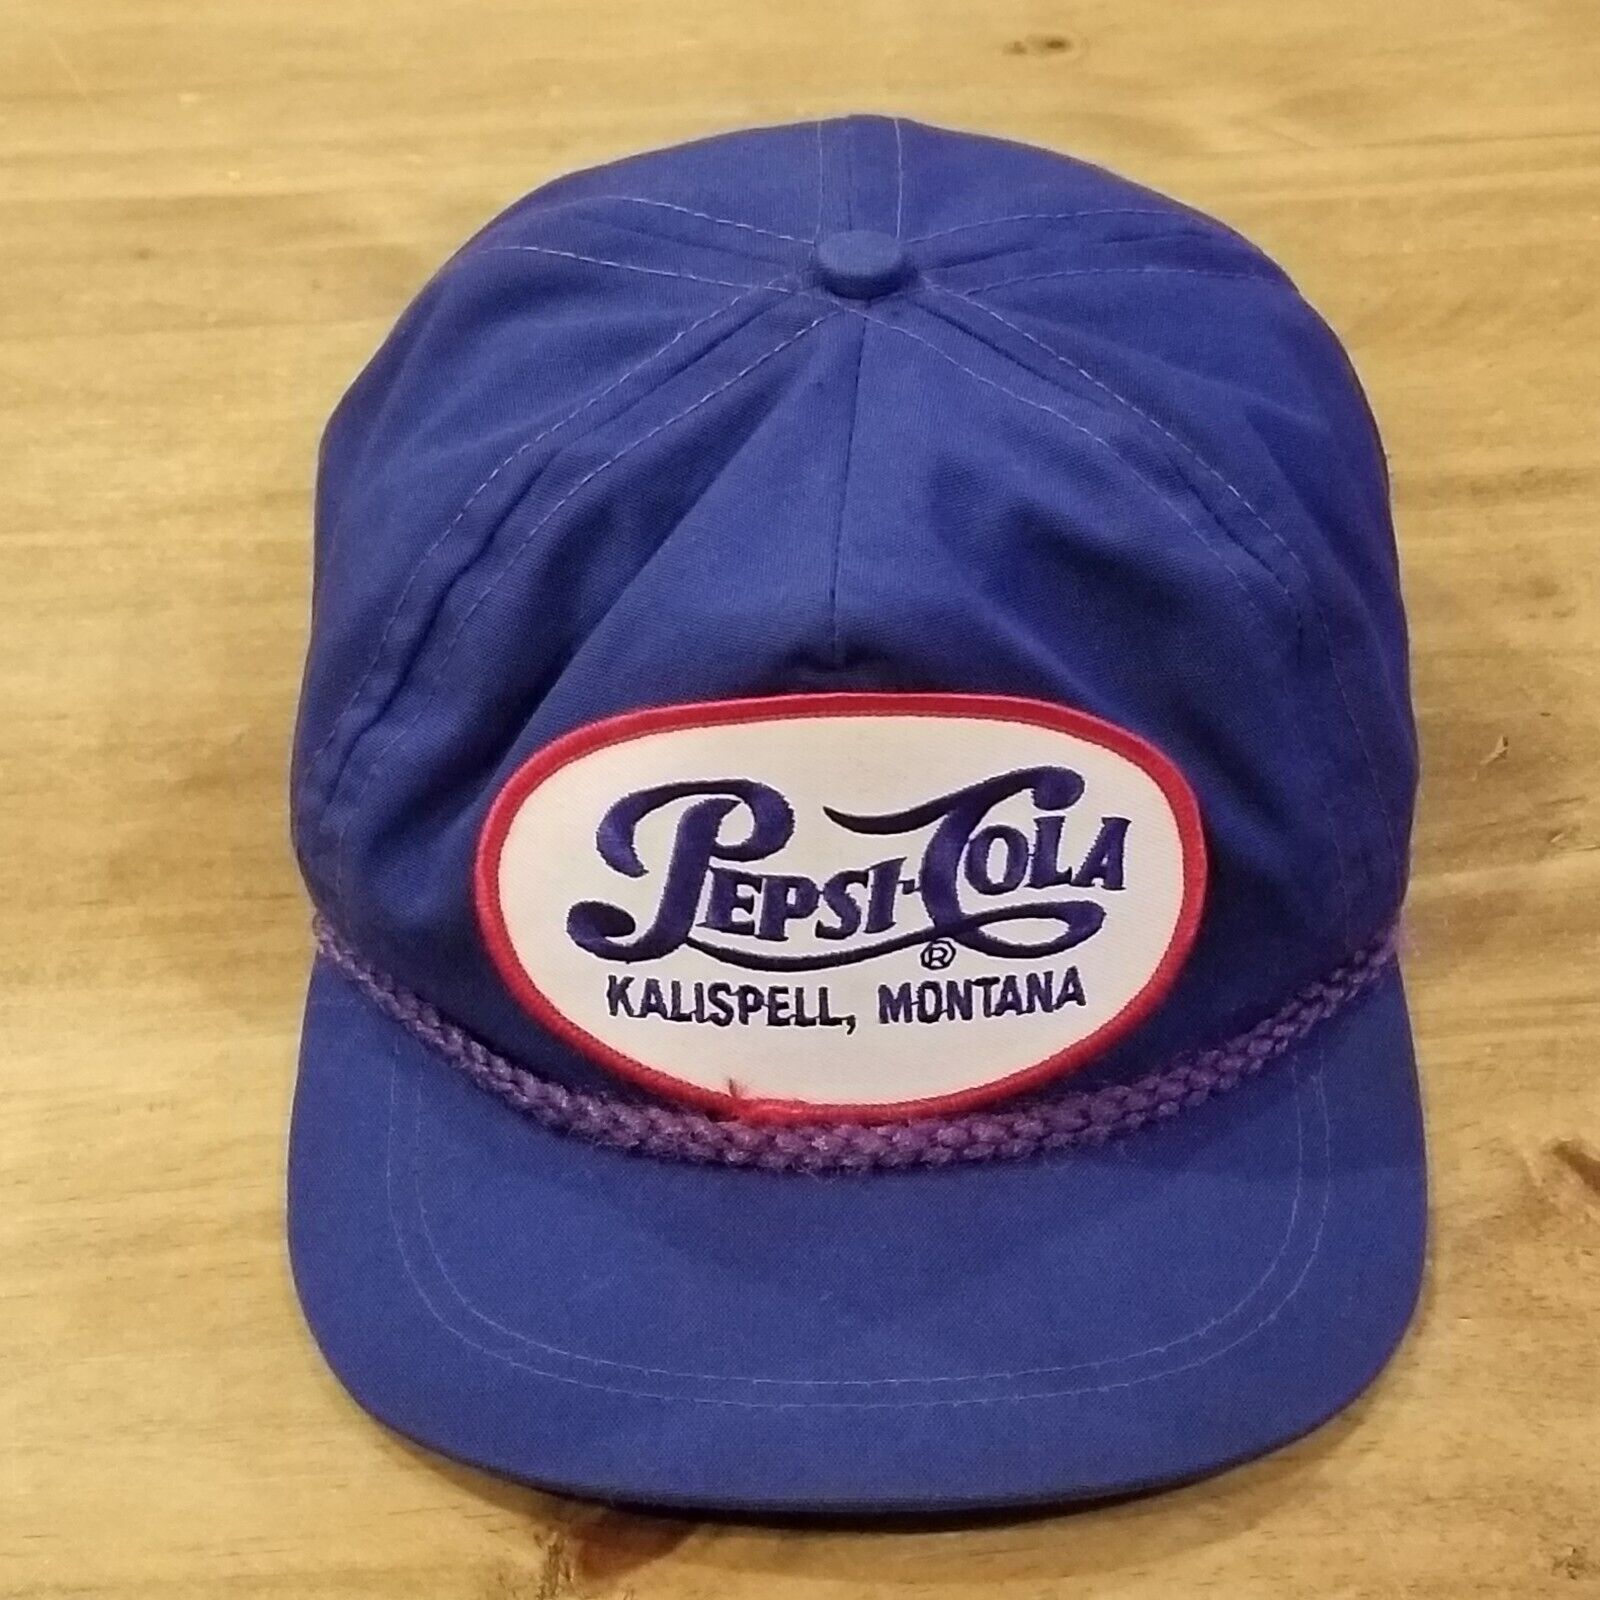 Vintage Pepsi Cola Hat Cap Strap Back Rope Kalispell Montana One Size Imperial